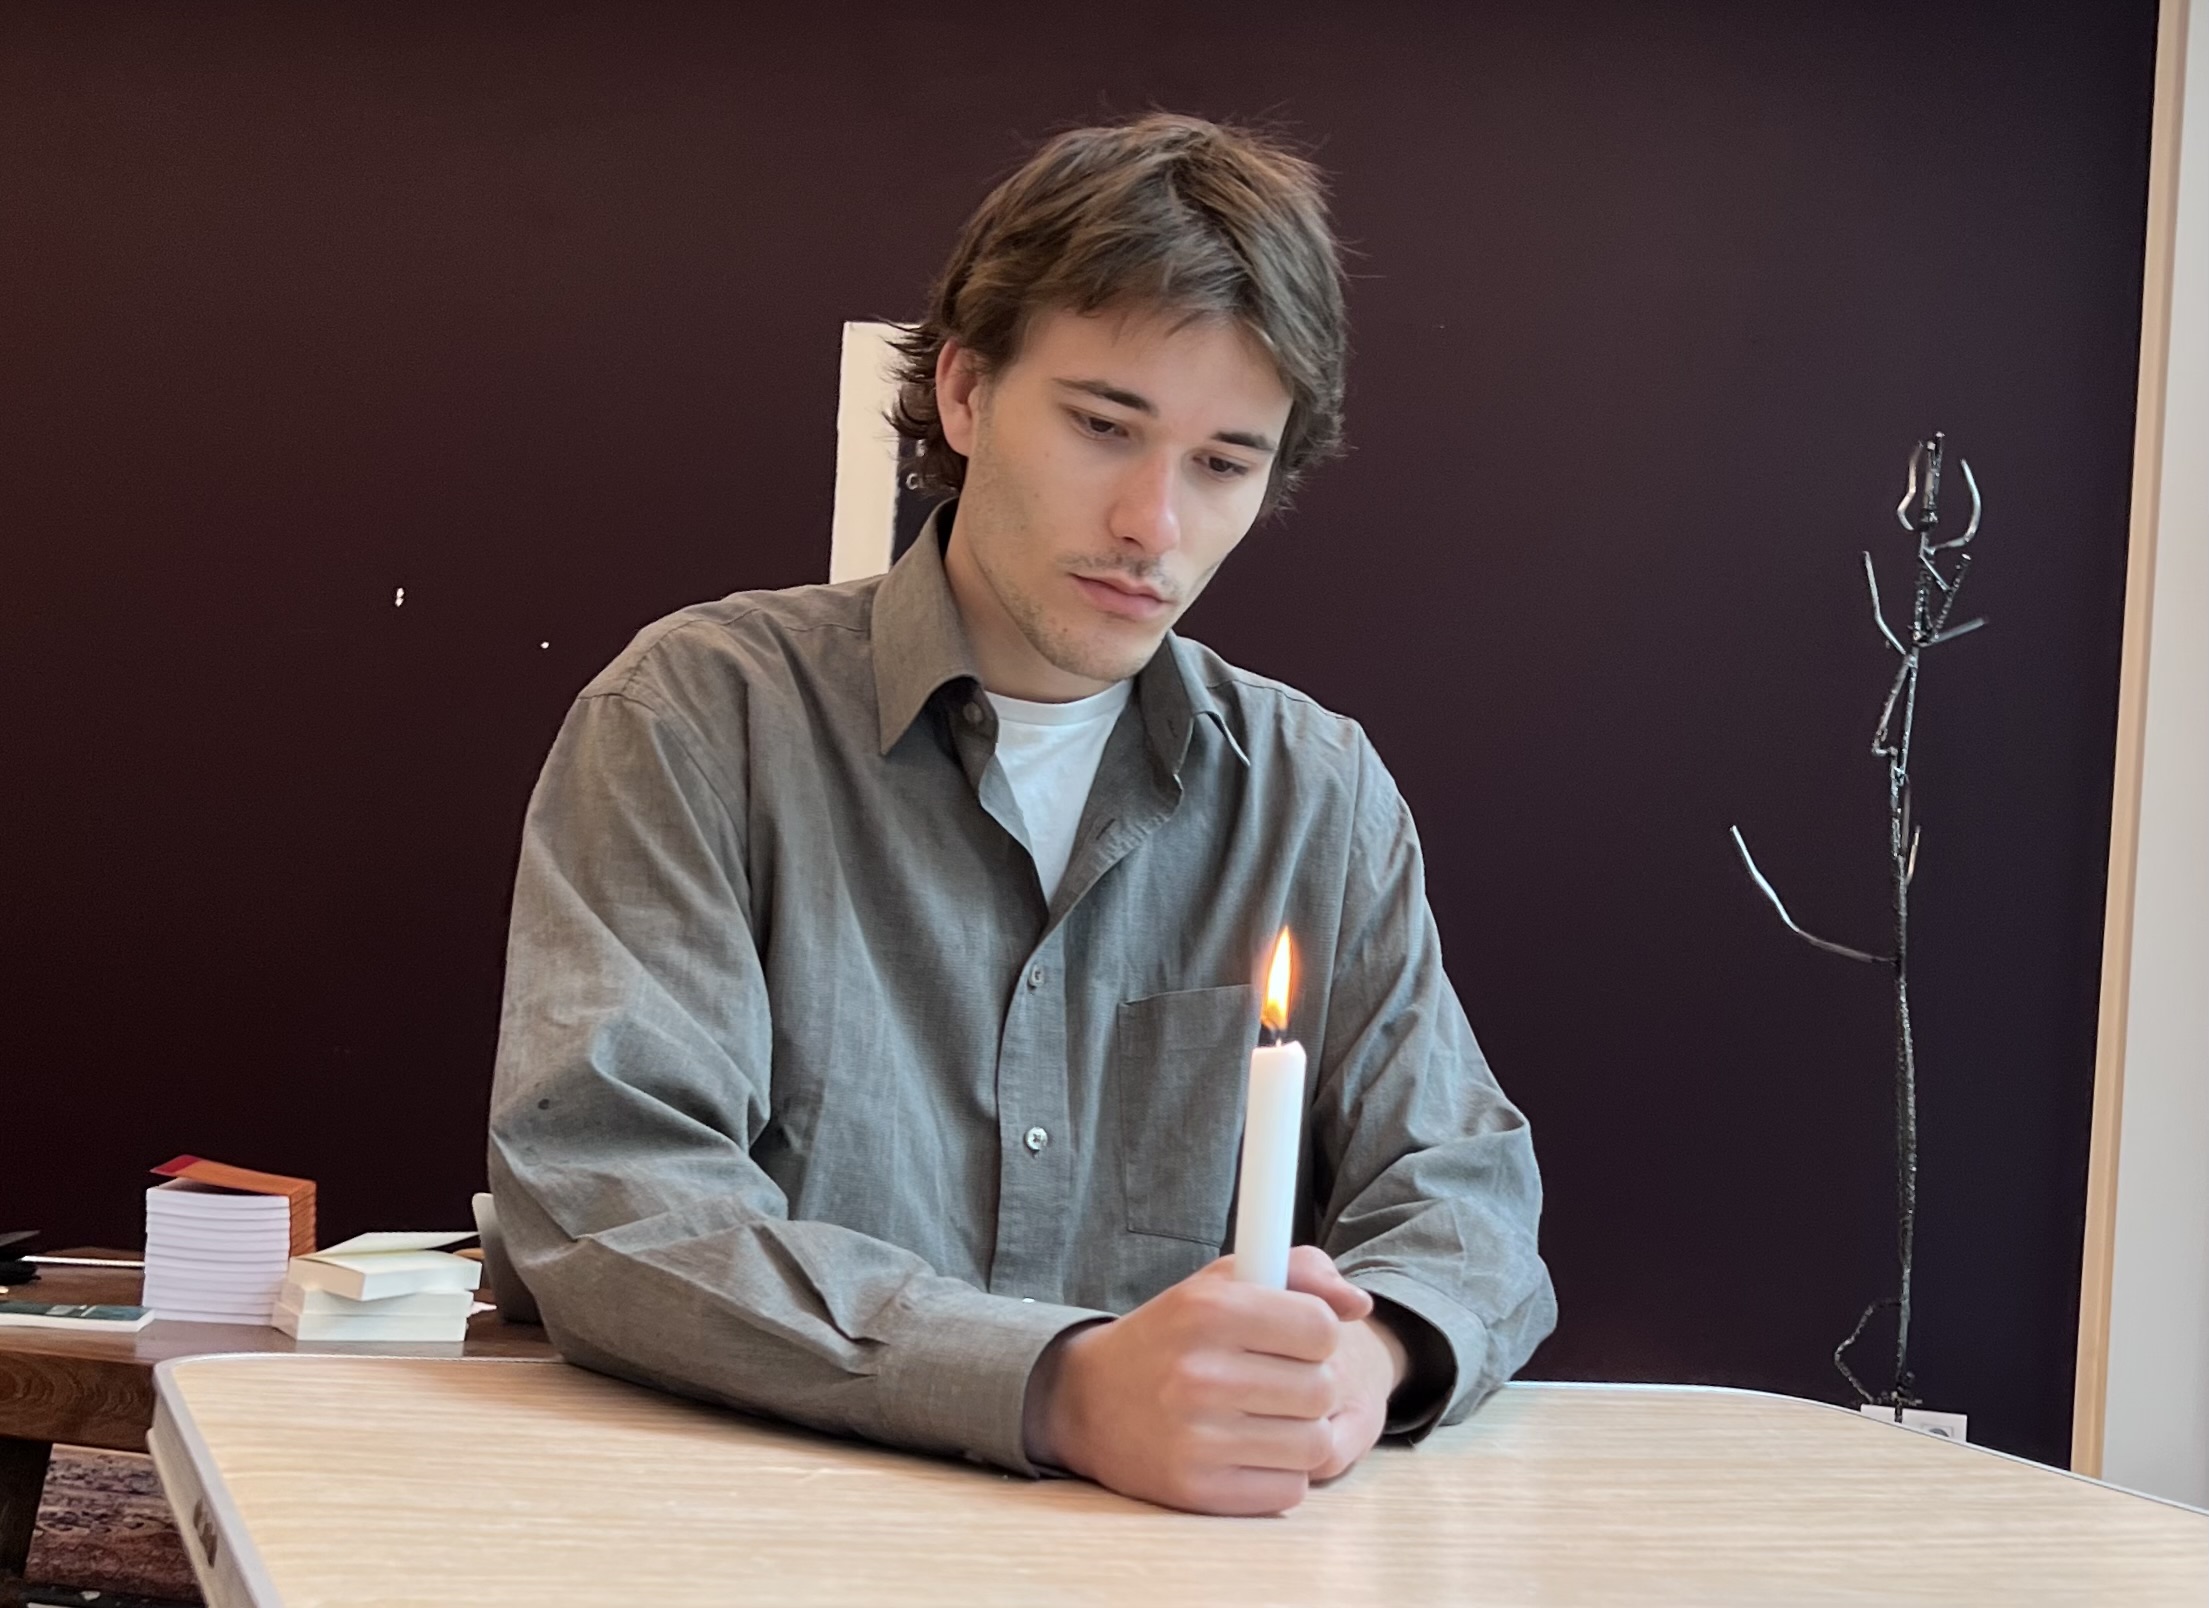 Performance with candle, Ruben De Smet